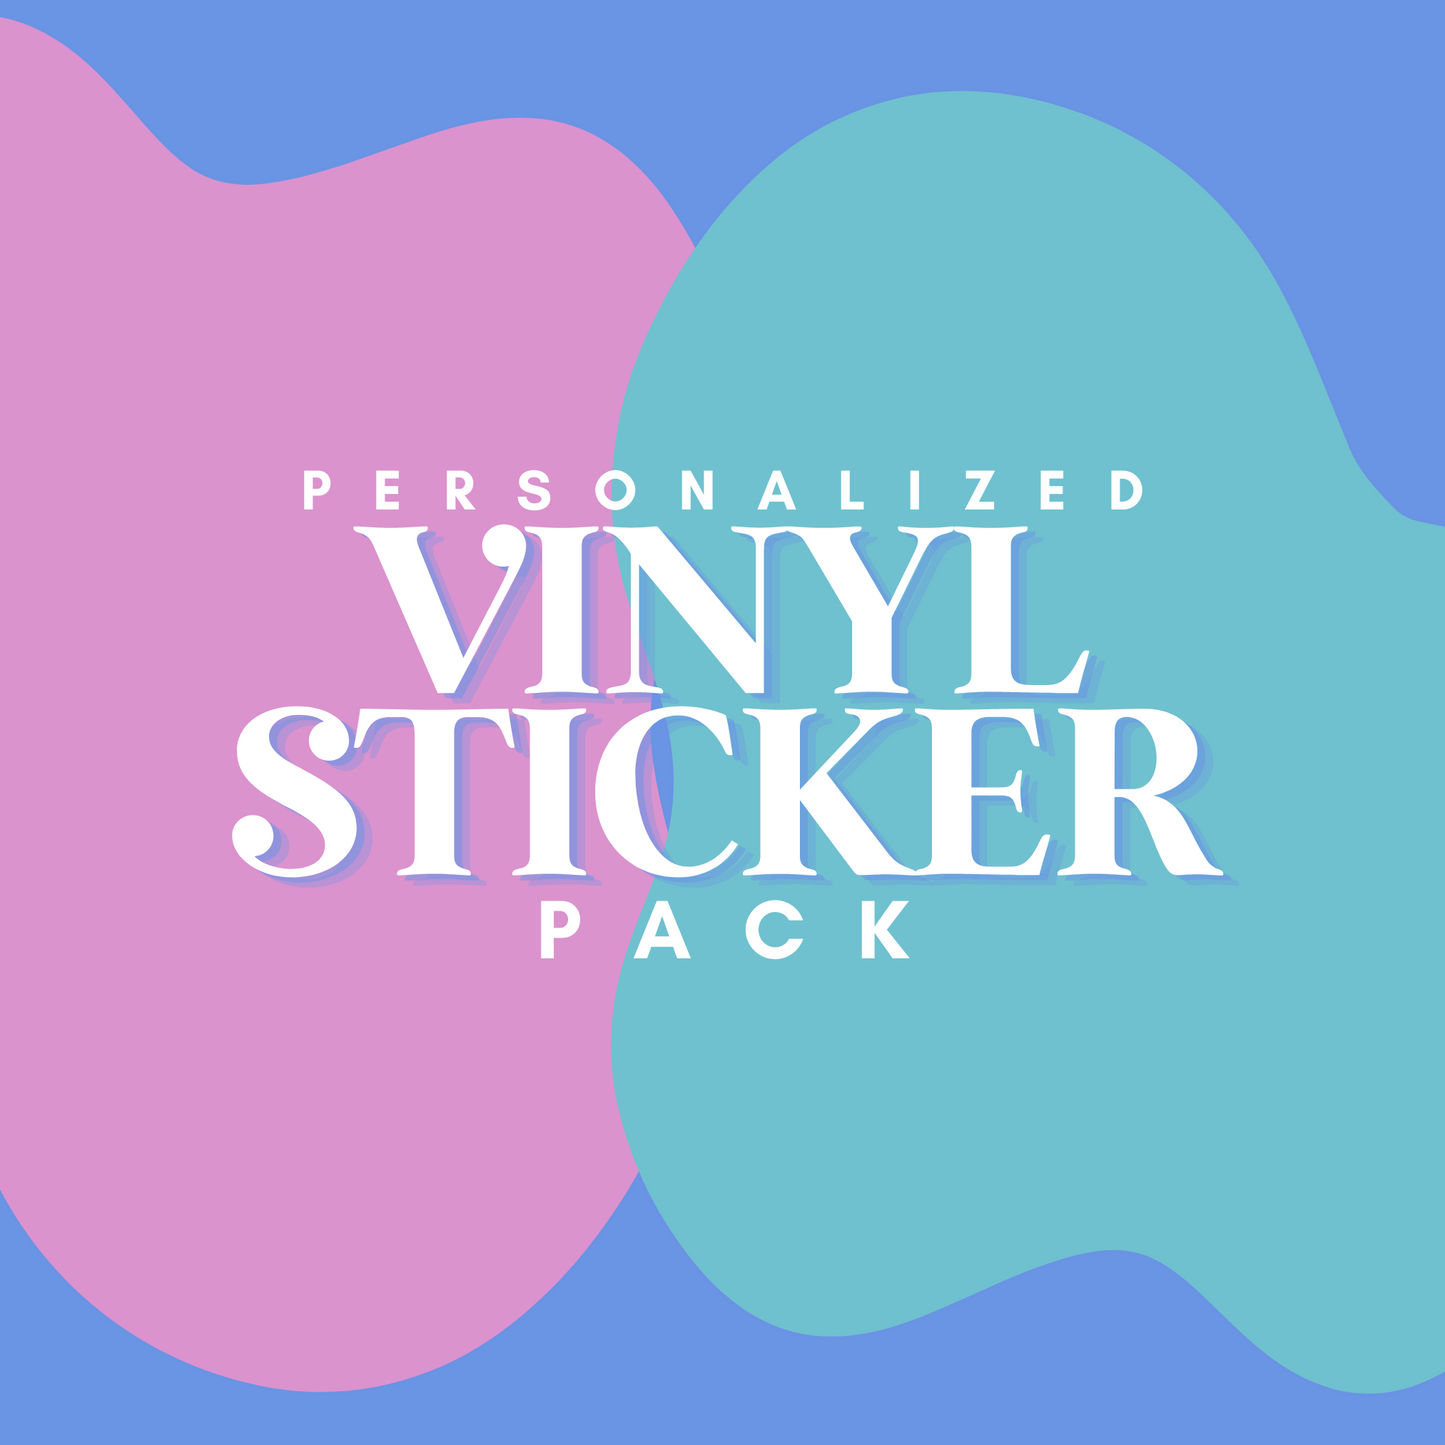 PERSONALIZED VINYL STICKER PACK